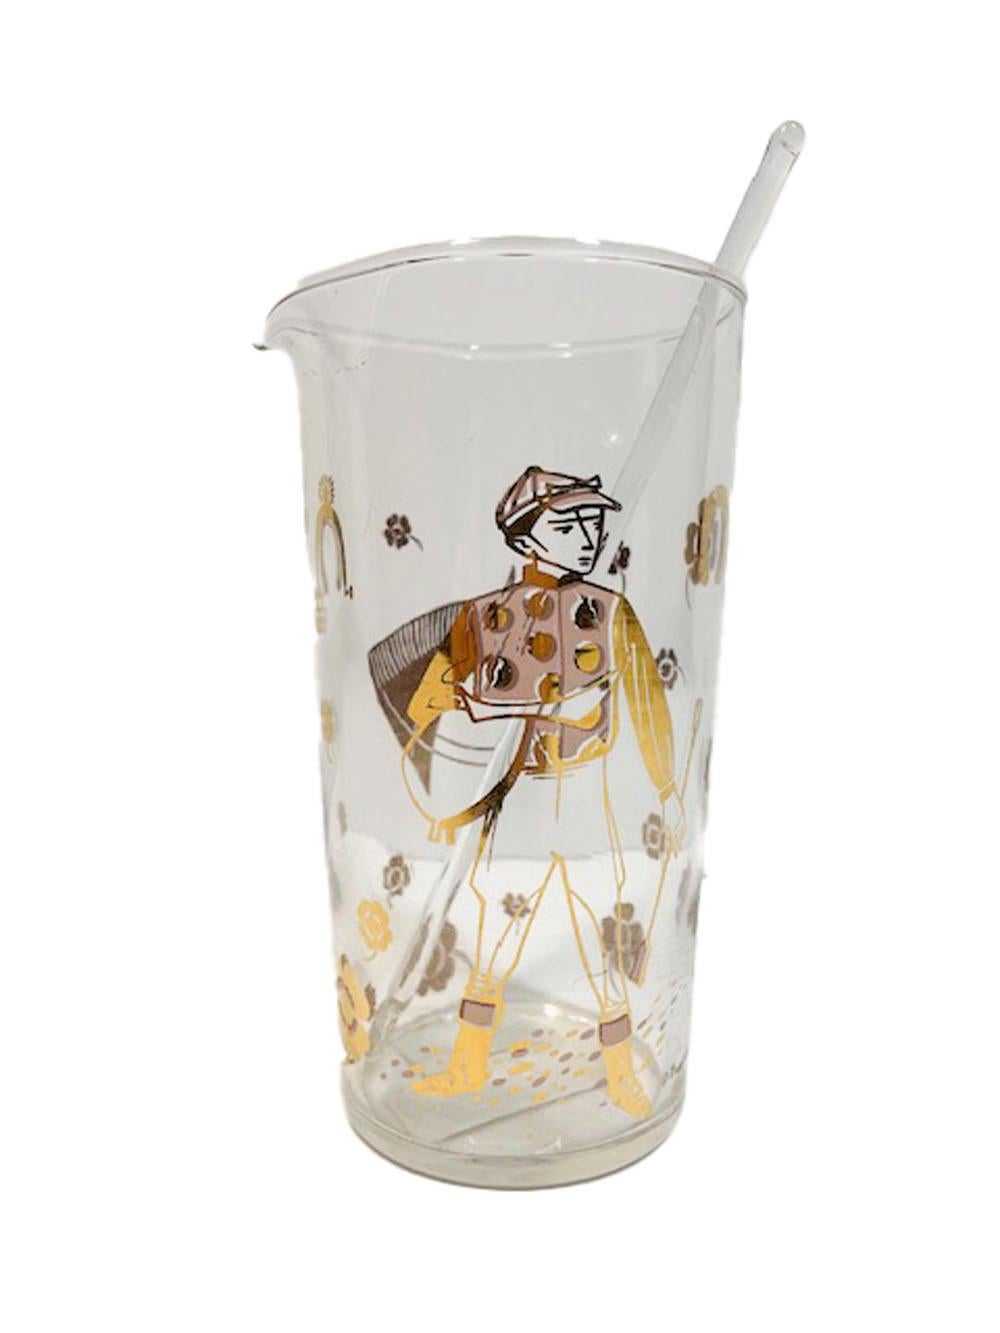 Mid-Century Modern cocktail pitcher and stirrer in clear glass decorated in the Derby Time pattern by Fred Press. One side is decorated in gold with the head of a thoroughbred race horse and the other with the image of a jockey in gold with pink